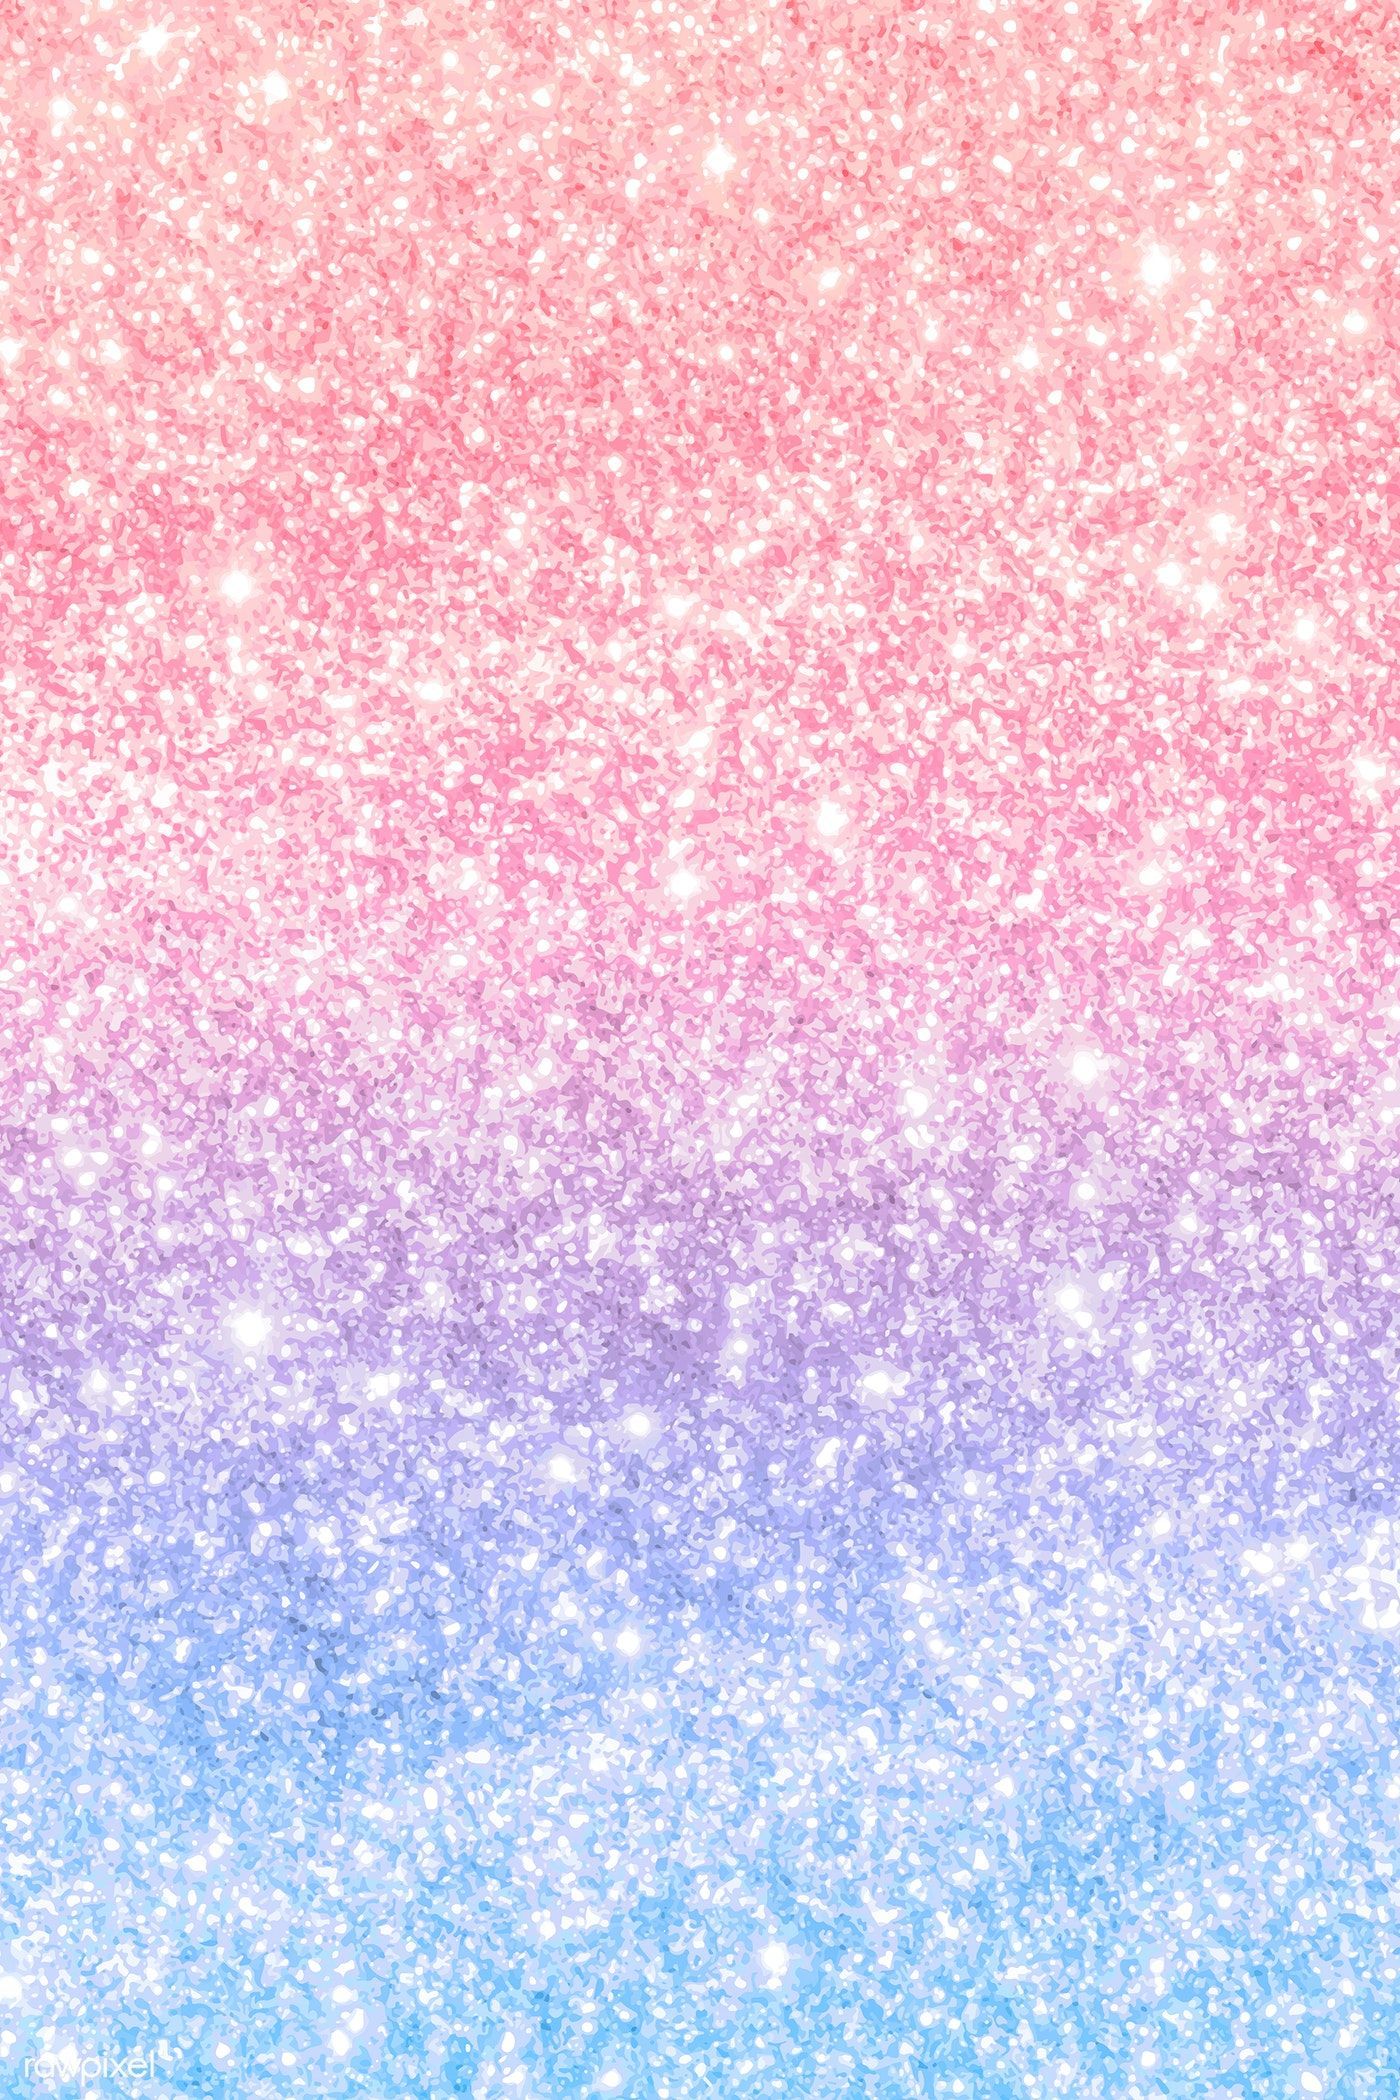 Download premium vector of Pink and blue glittery pattern background. Pink glitter wallpaper, Glittery wallpaper, Sparkle wallpaper